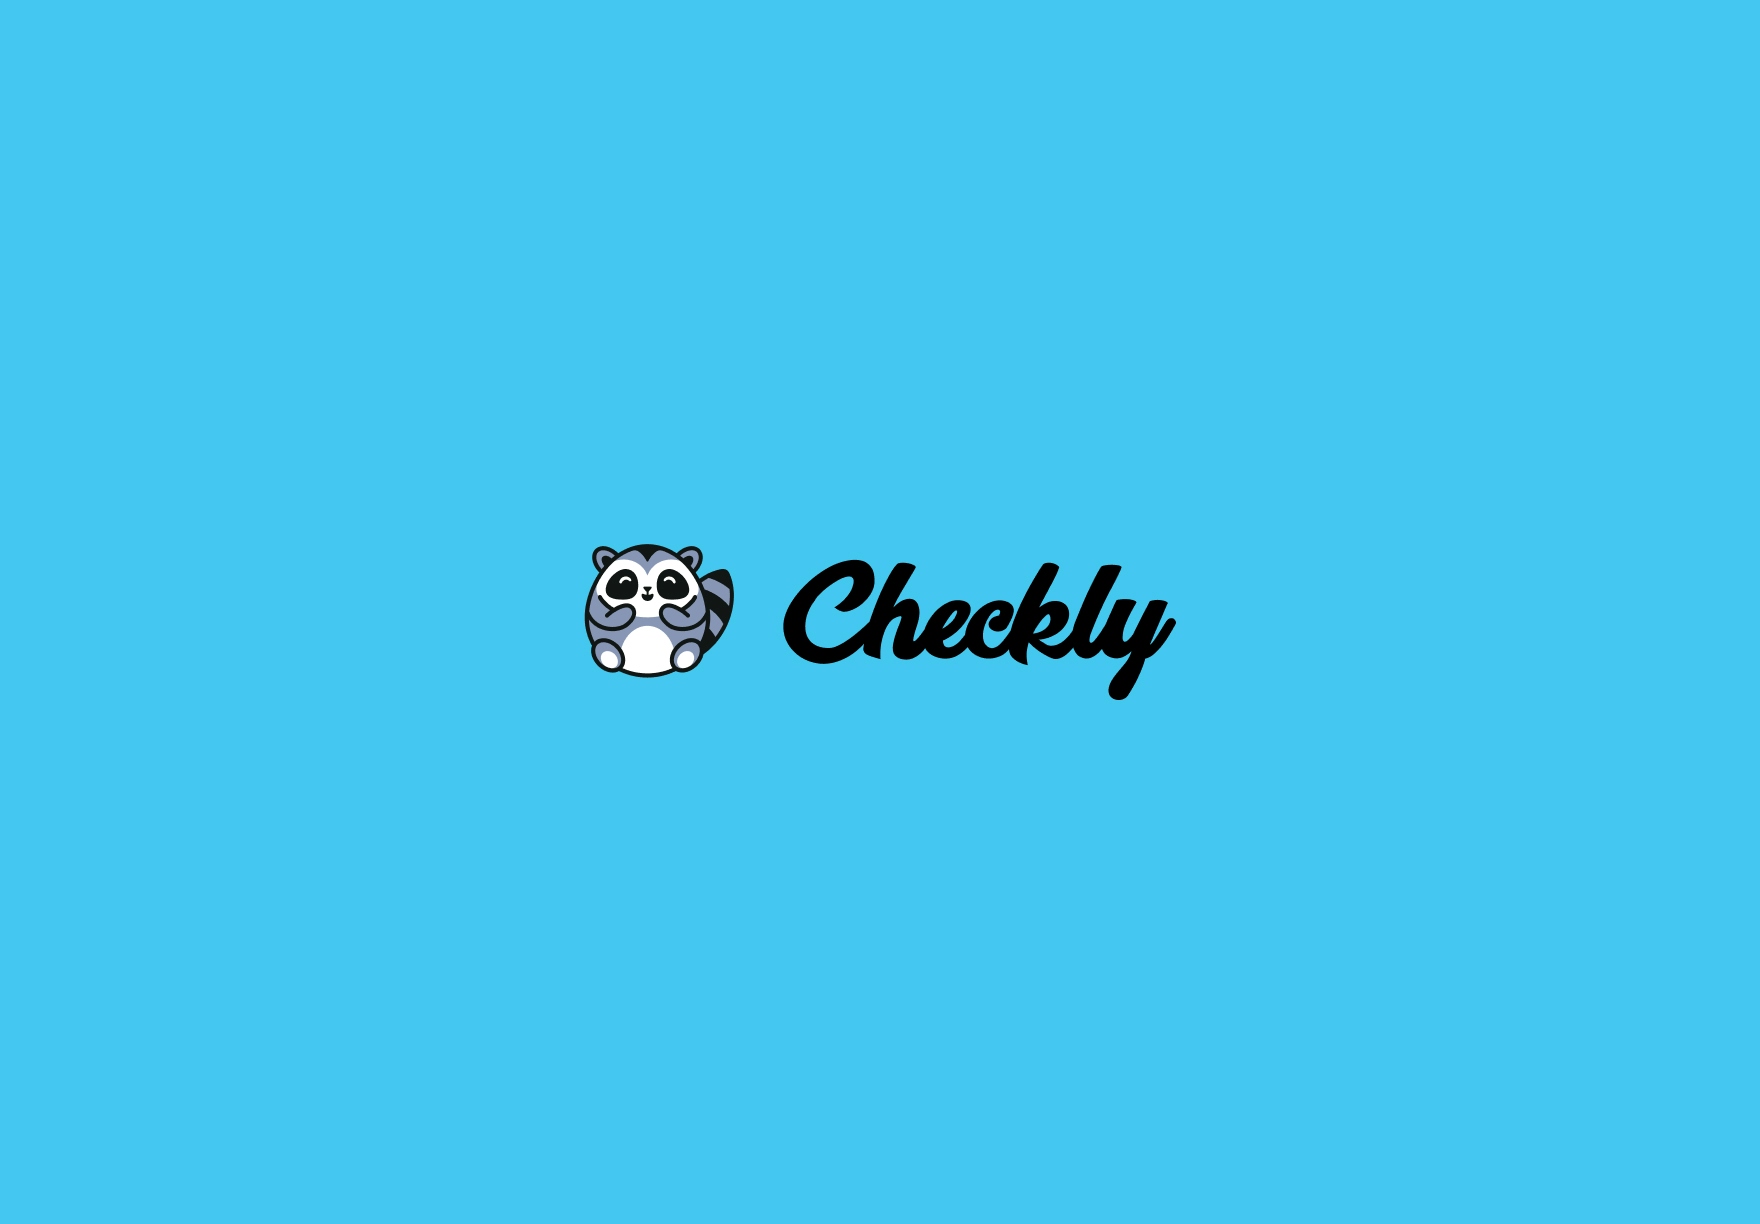 Kaylie Boogaerts, director of people at Checkly